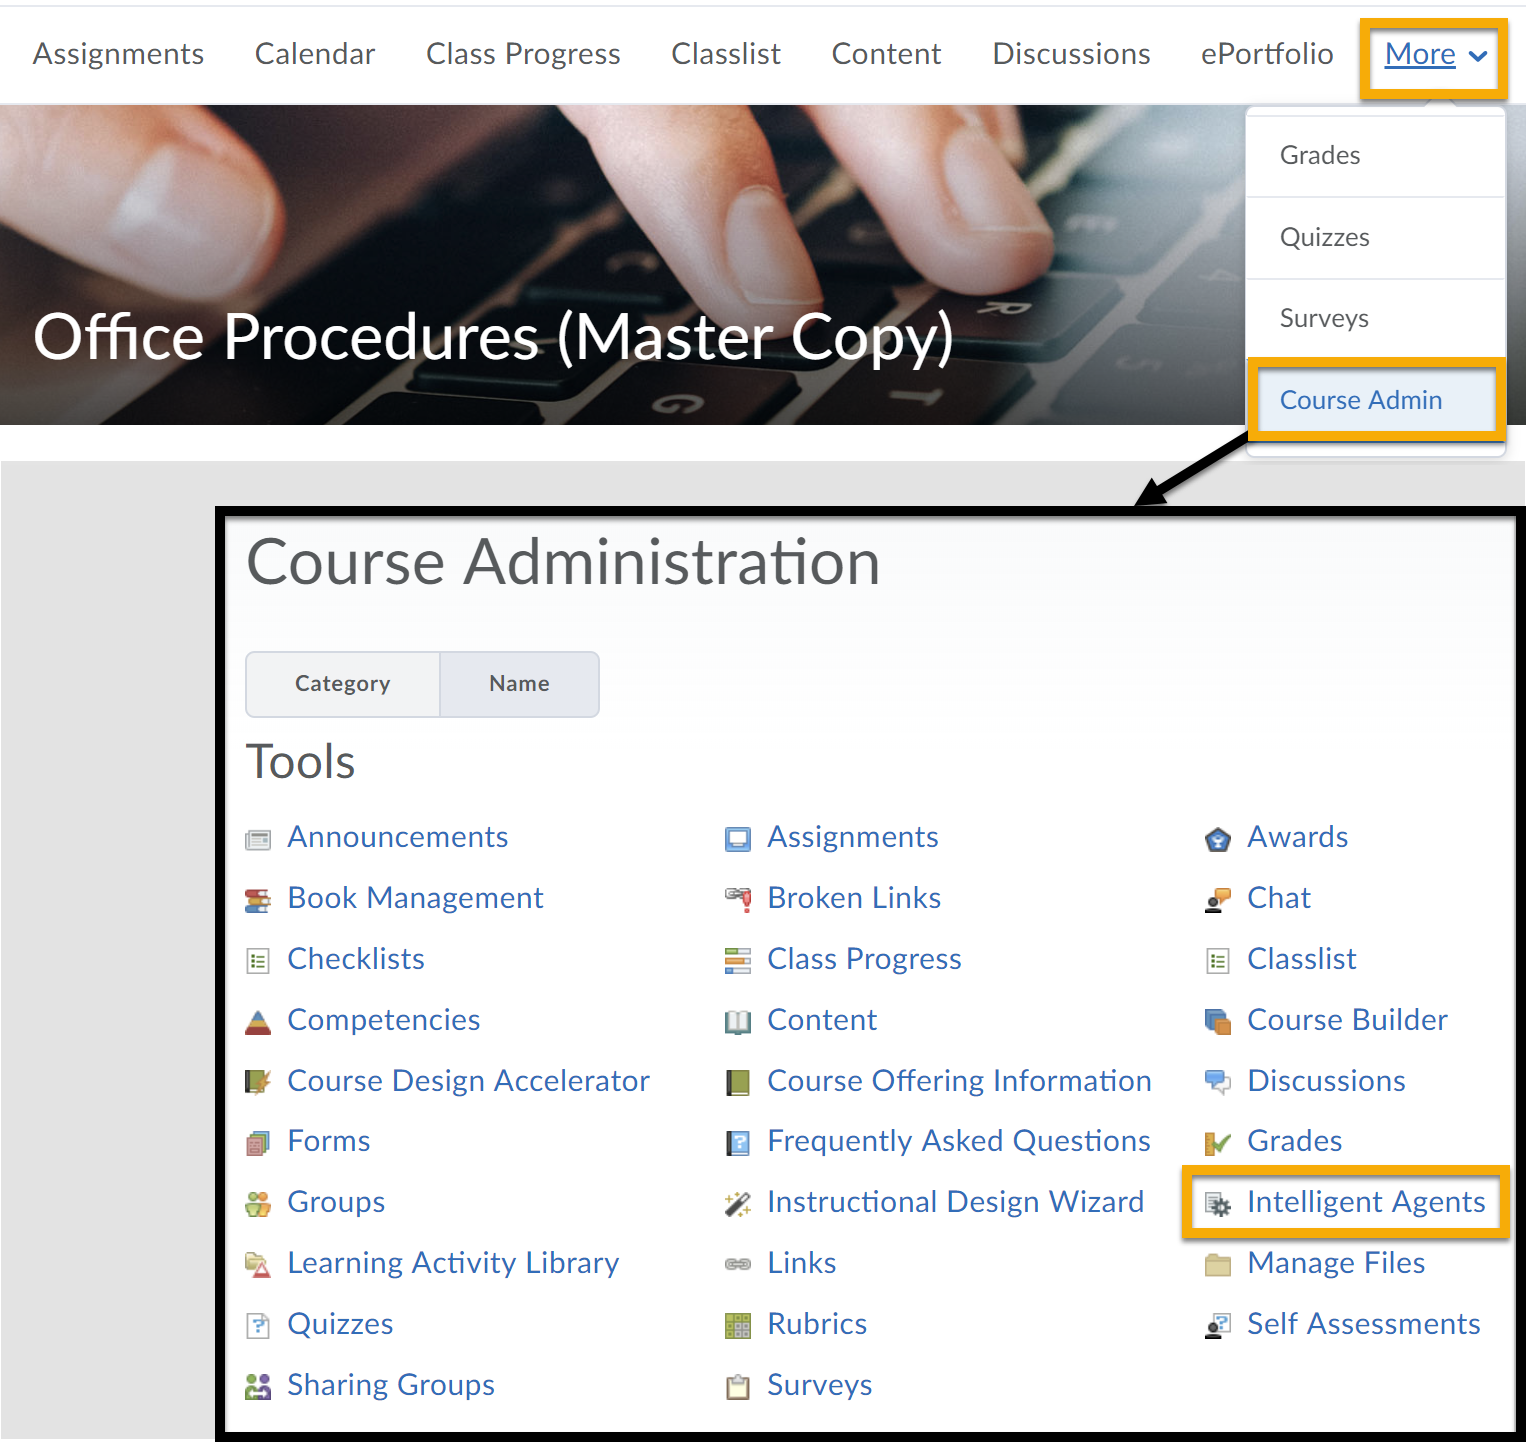 More and Course Admin highlighted from the navba. Arrow pointing to open Course Administration page. Intelligent Agents highlighted.